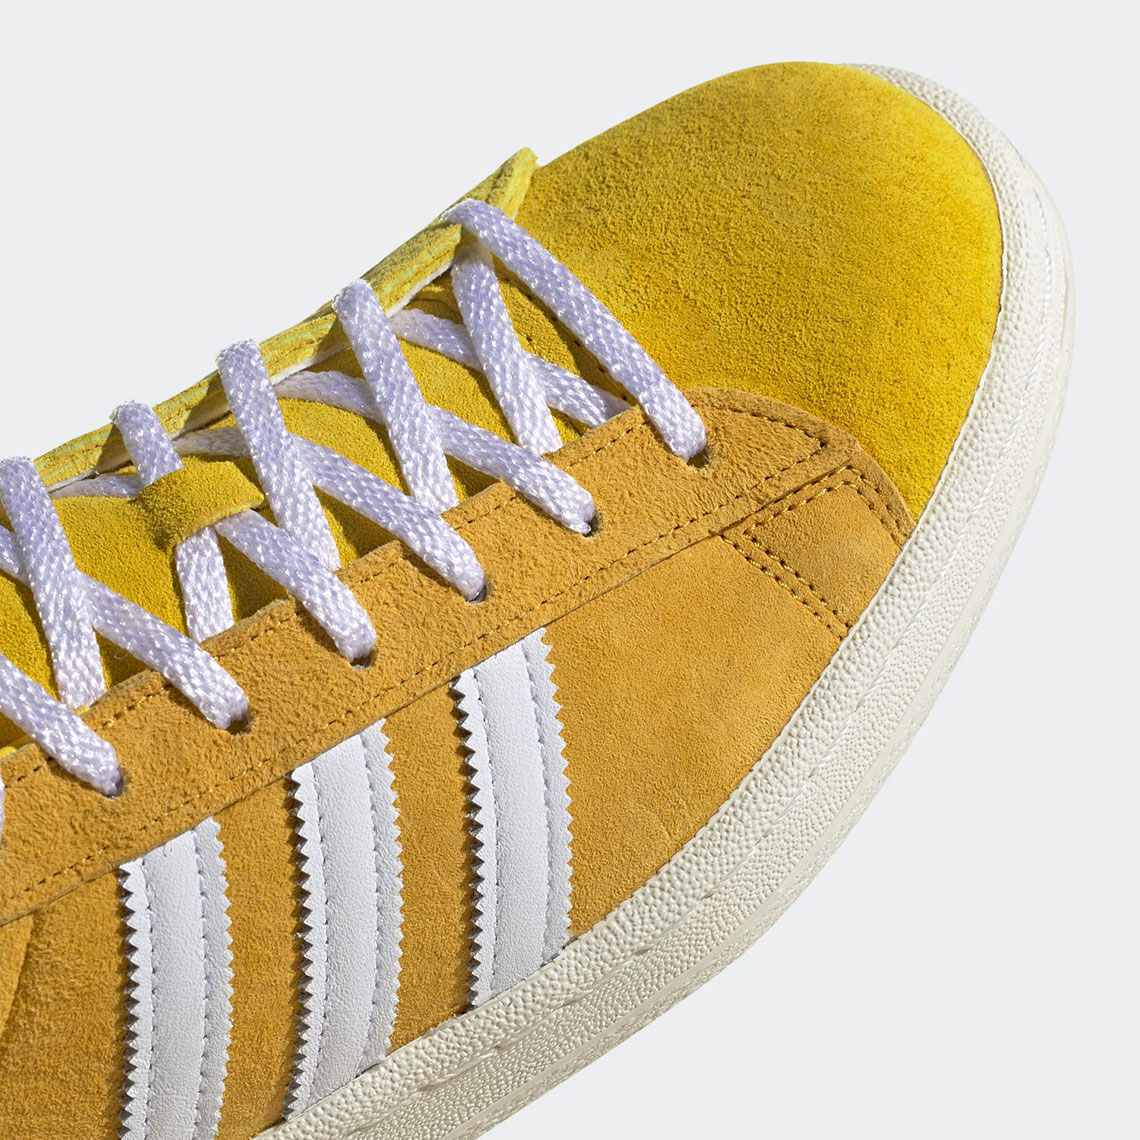 Adidas Campus 80s Bold Gold Cloud White Yellow Fx5443 8